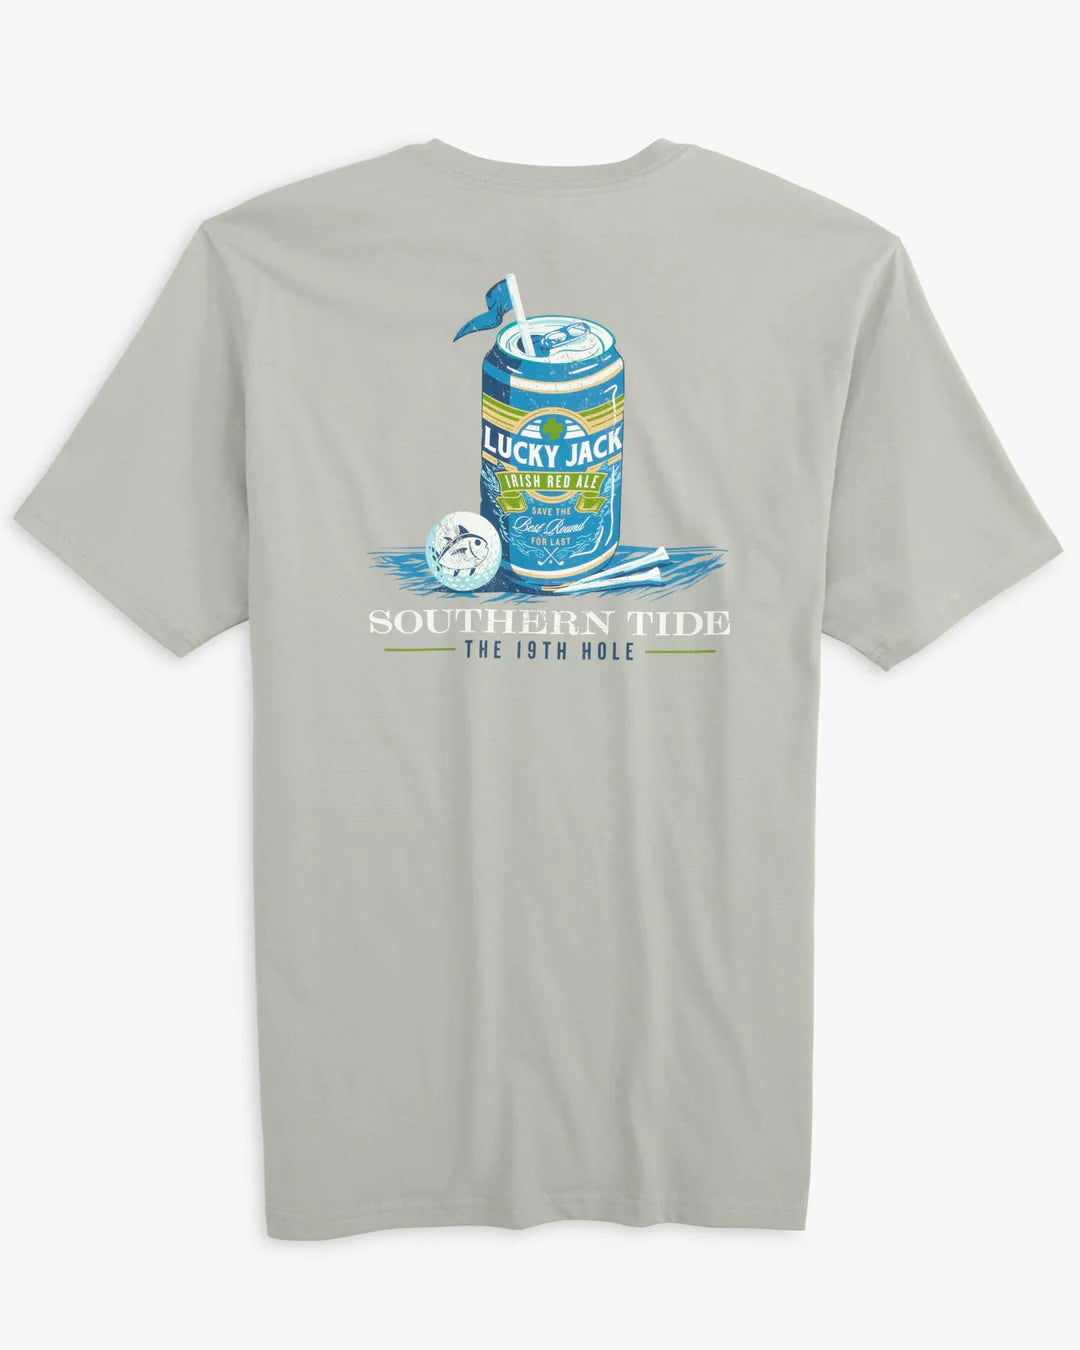 Southern Tide Men's Lucky Jacks 19th Hole Tee, full back view.